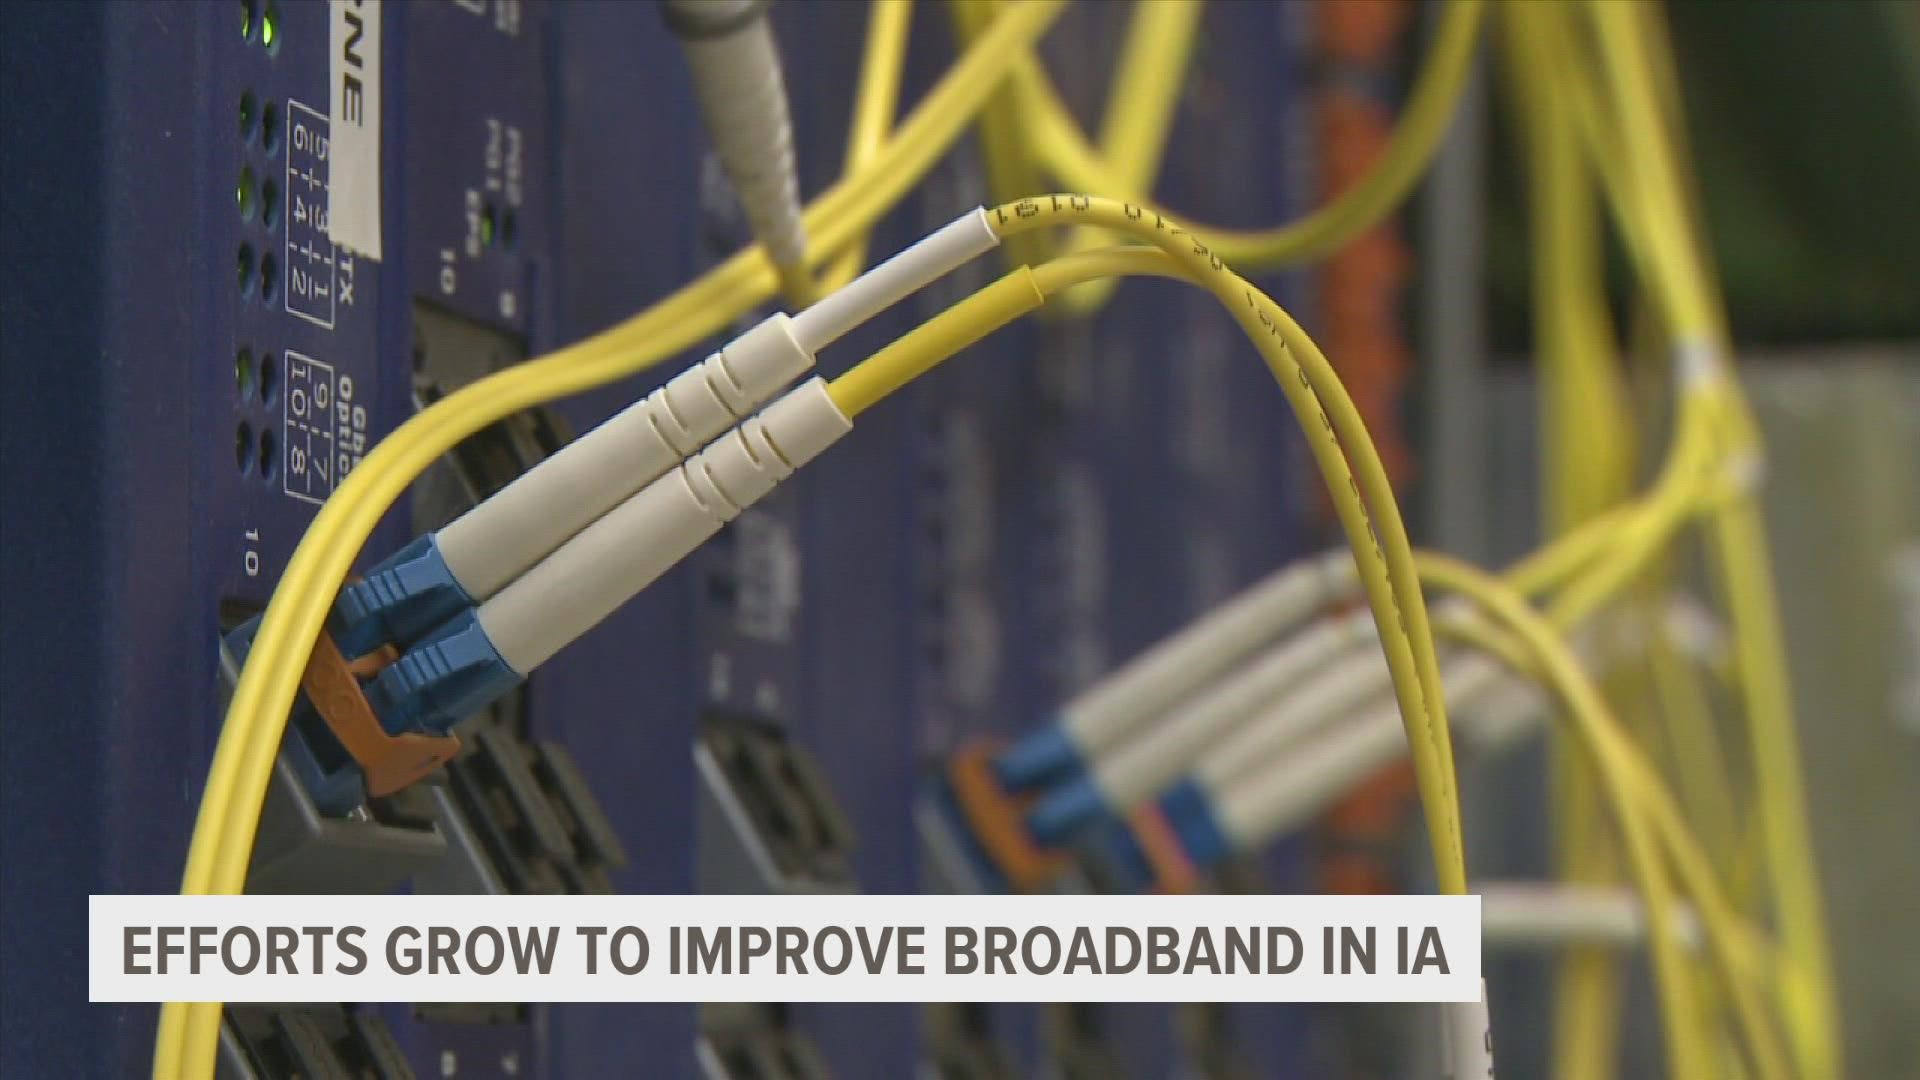 Projects awarded under this grant will bring more than $526 million of new broadband infrastructure investment to the state, according to Gov. Kim Reynolds' office.